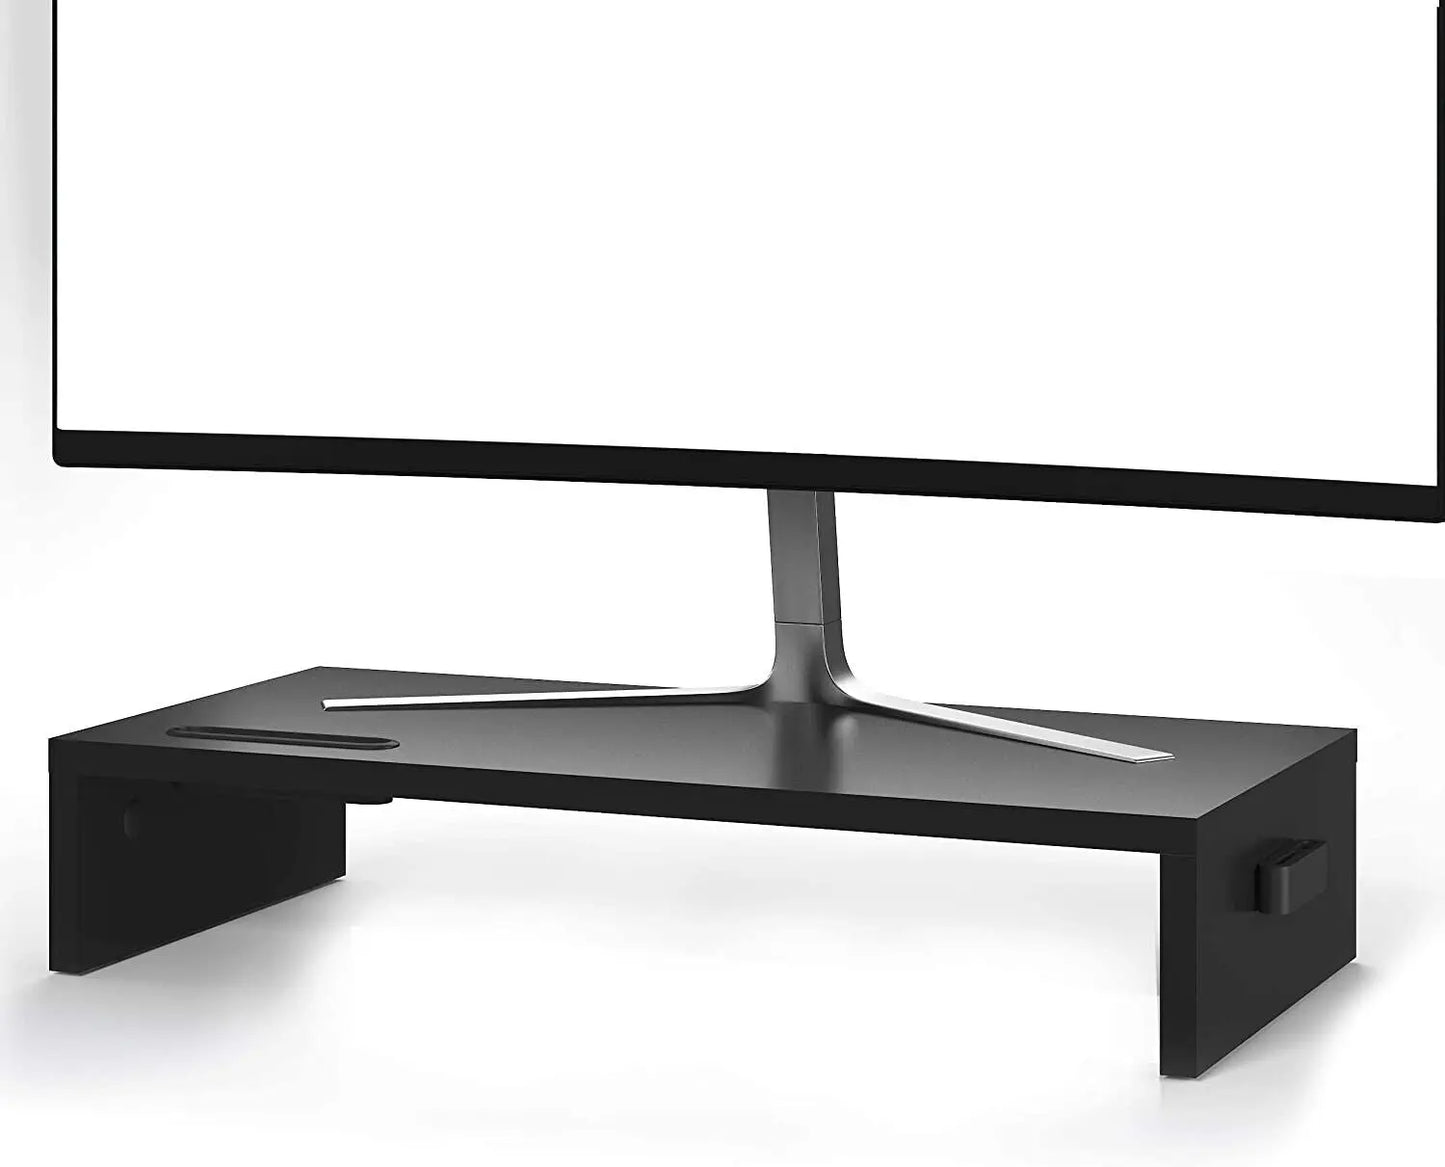 Black Monitor Stand Riser - Perfect Desk Organizer for Your Computer, TV, or Laptop